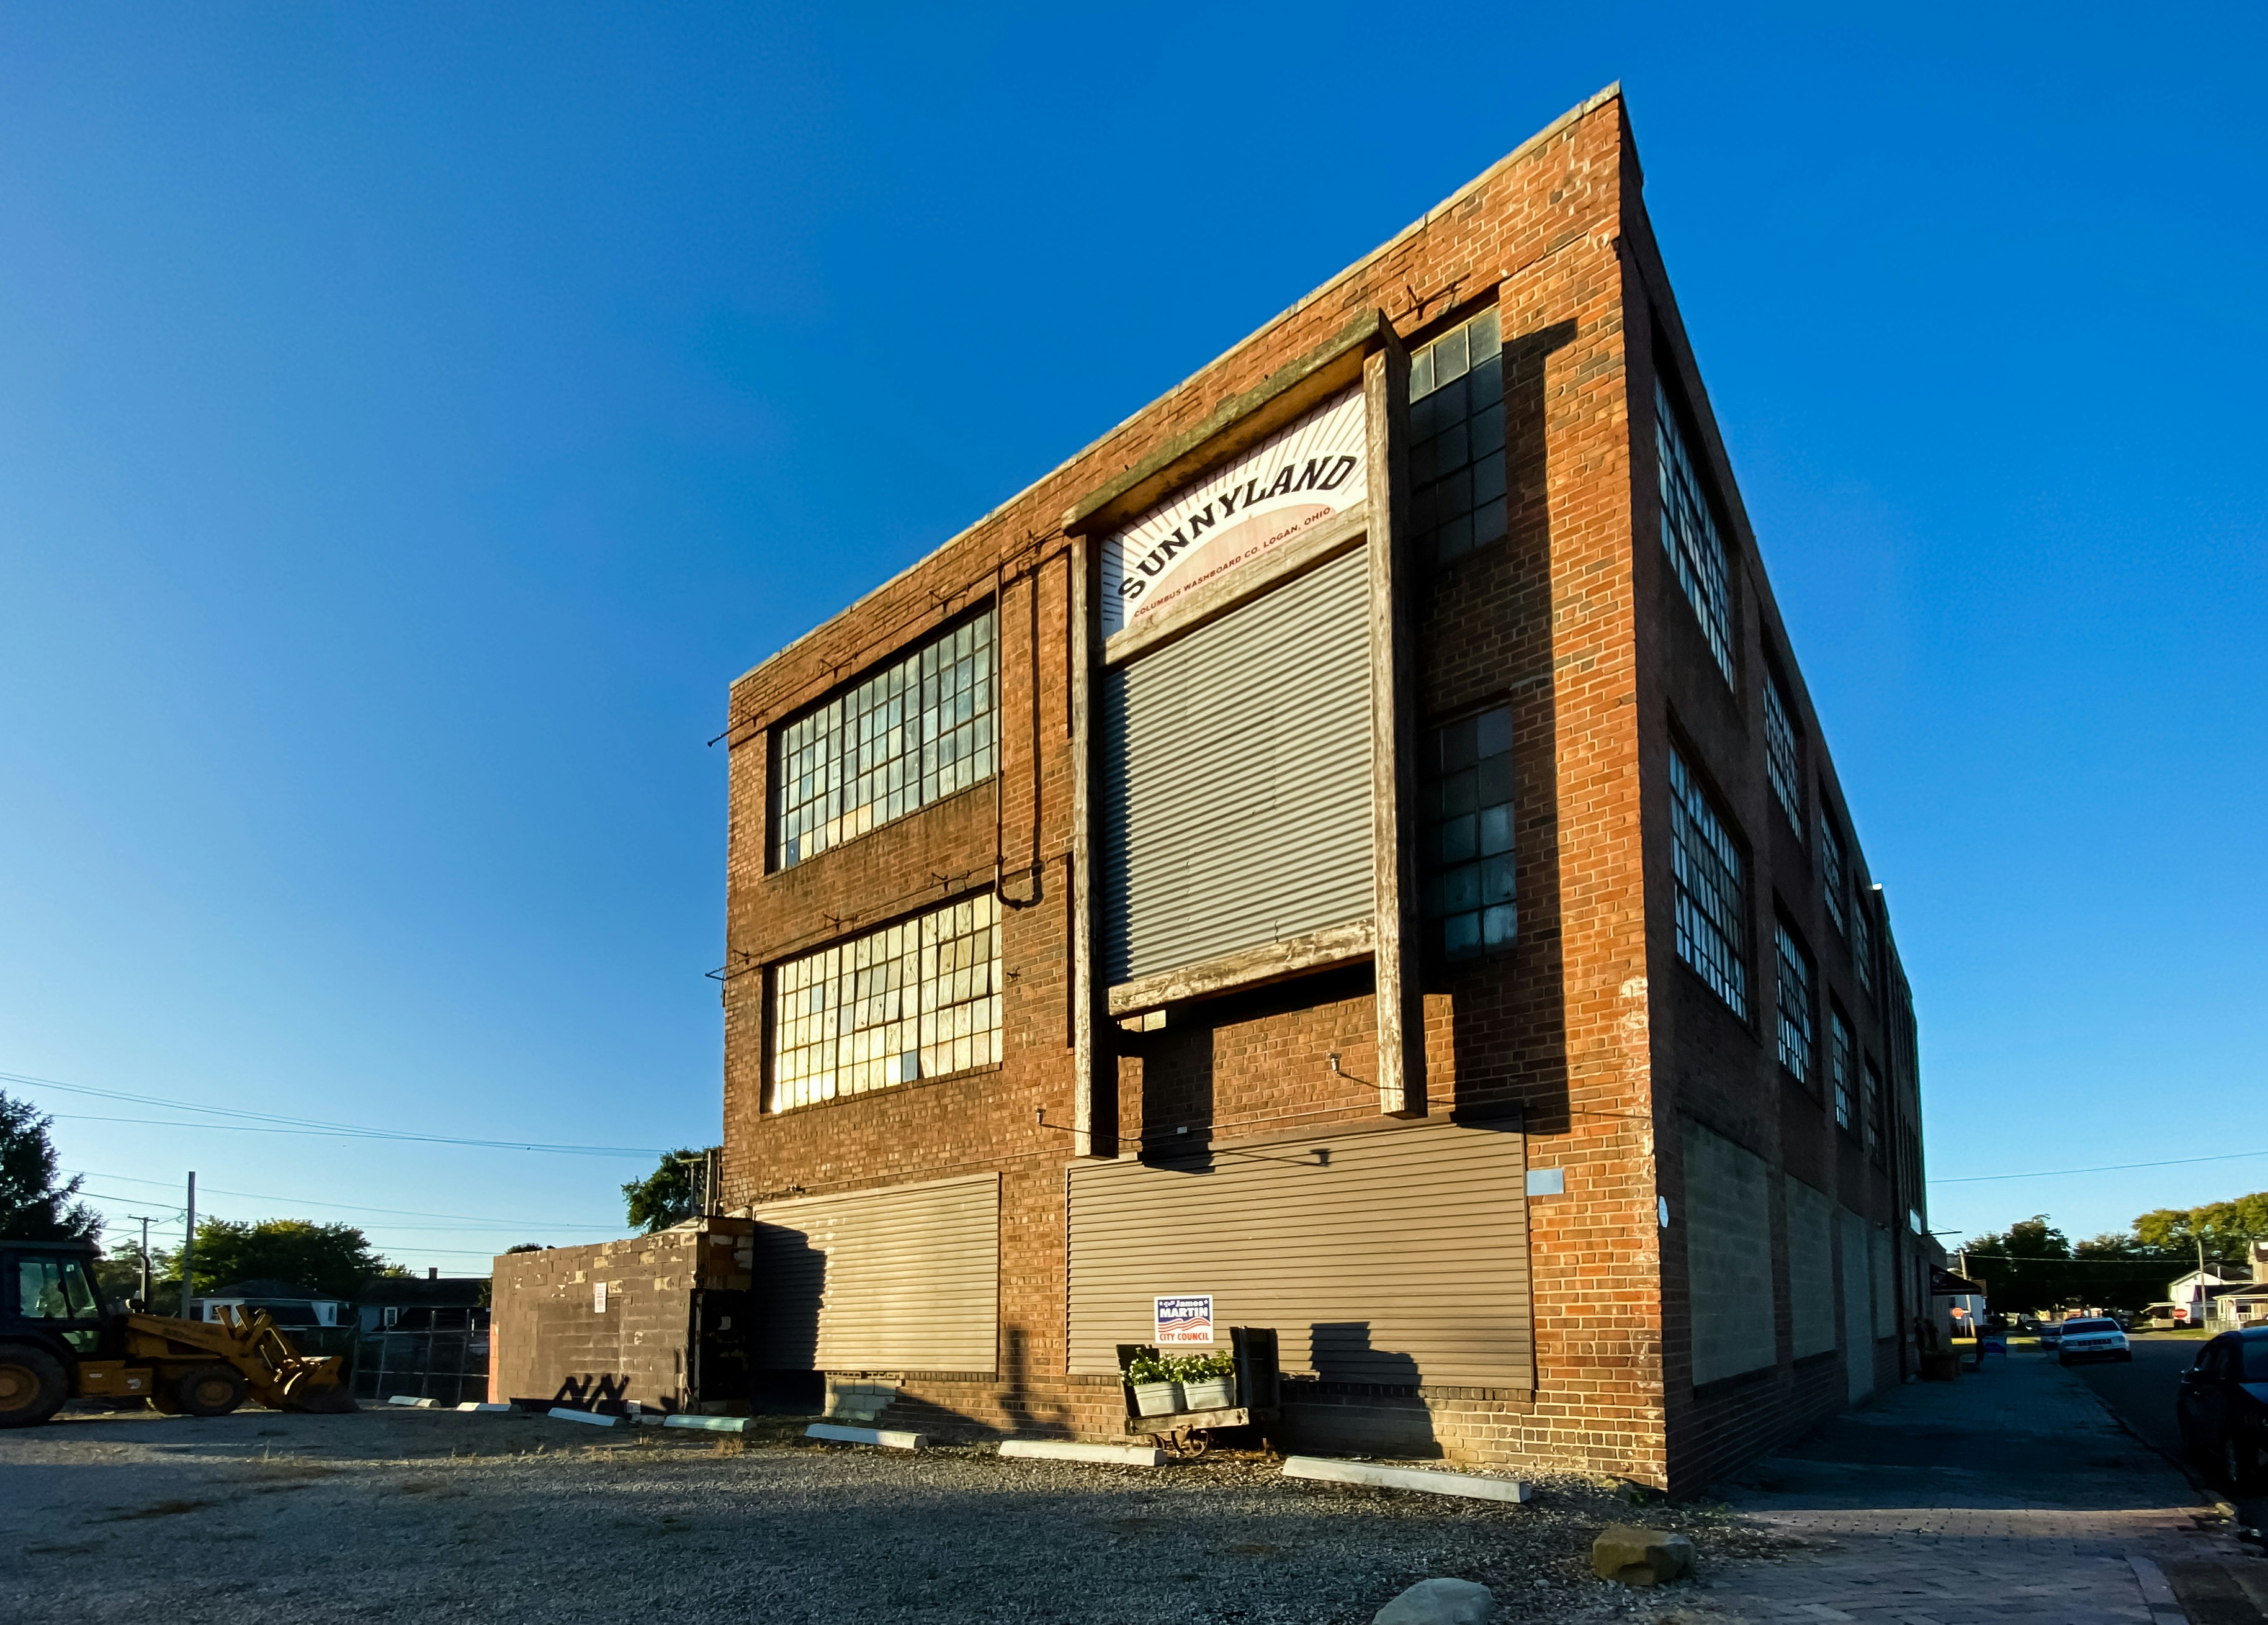 The brick and glass industrial exterior of the Columbus Washboard Factory is decorated with the world's largest washboard, a two-story version of the classic laundry devise with the words "Sunny Land" painted on the top with a sunbeam motif. 